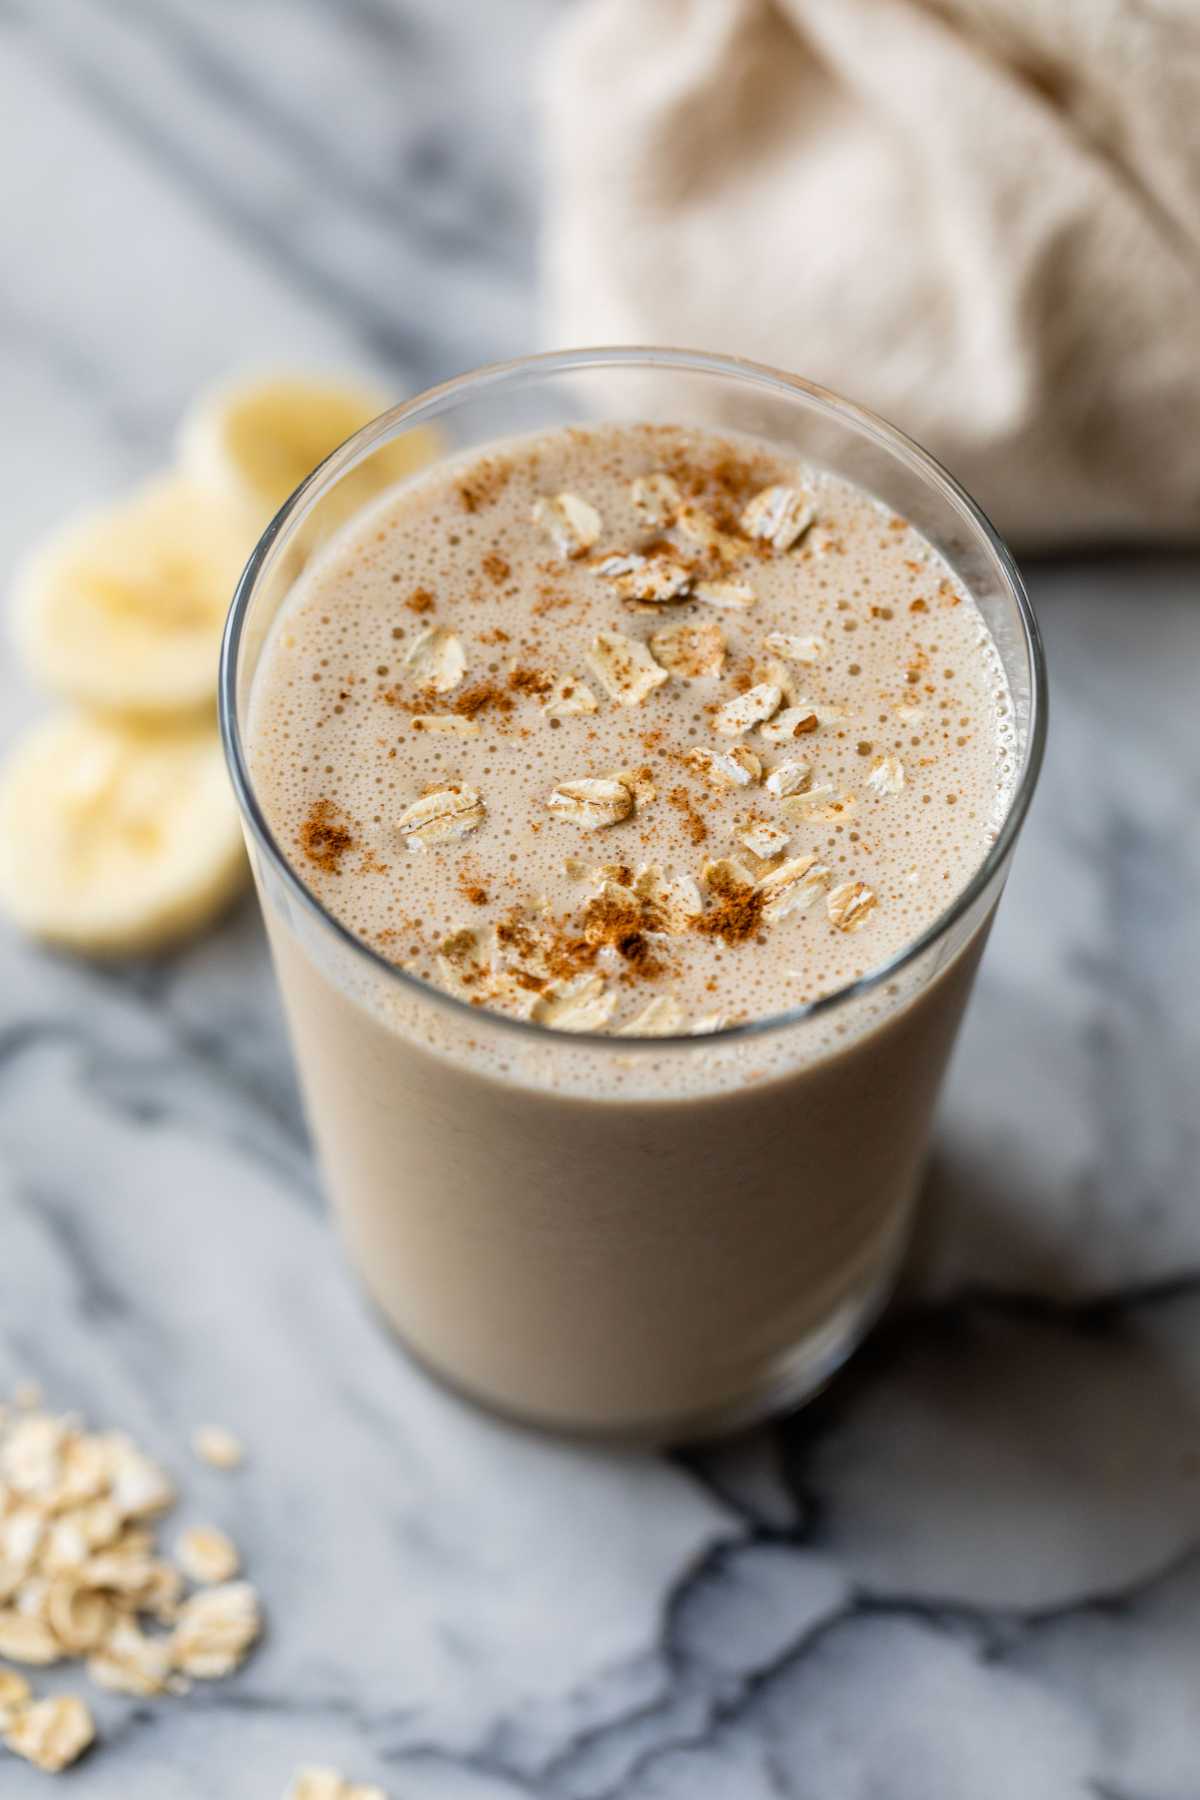 Breakfast smoothie in a glass near banana slices and rolled oats.